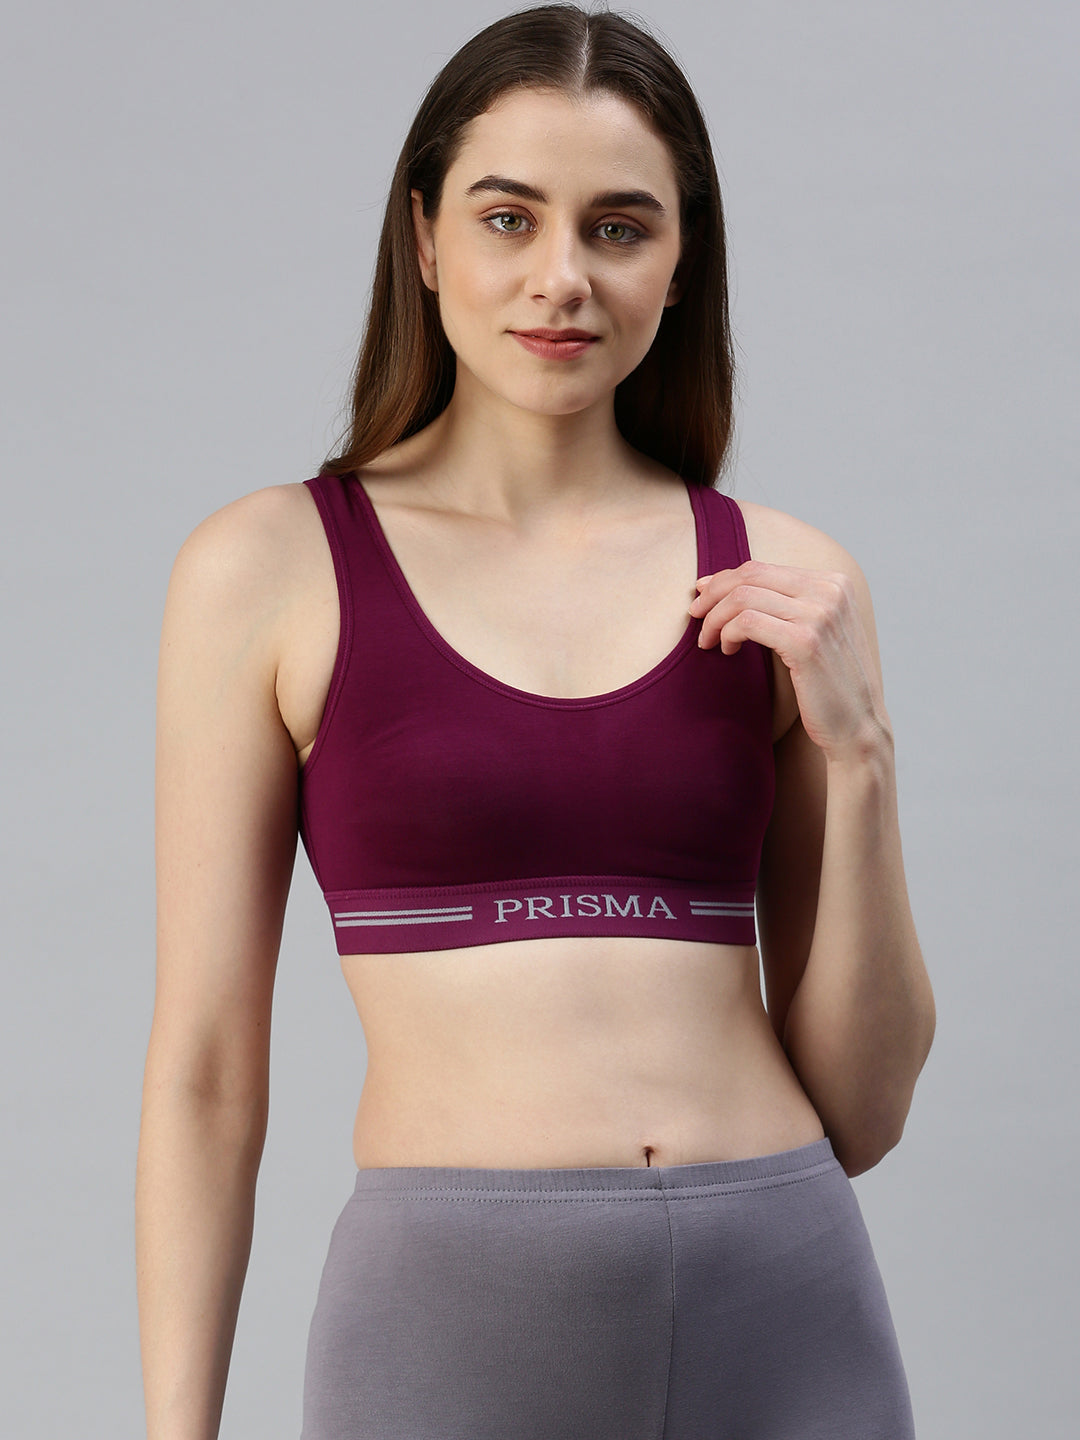 Prisma Plum Sports Bra - Molded for a Sporty Look